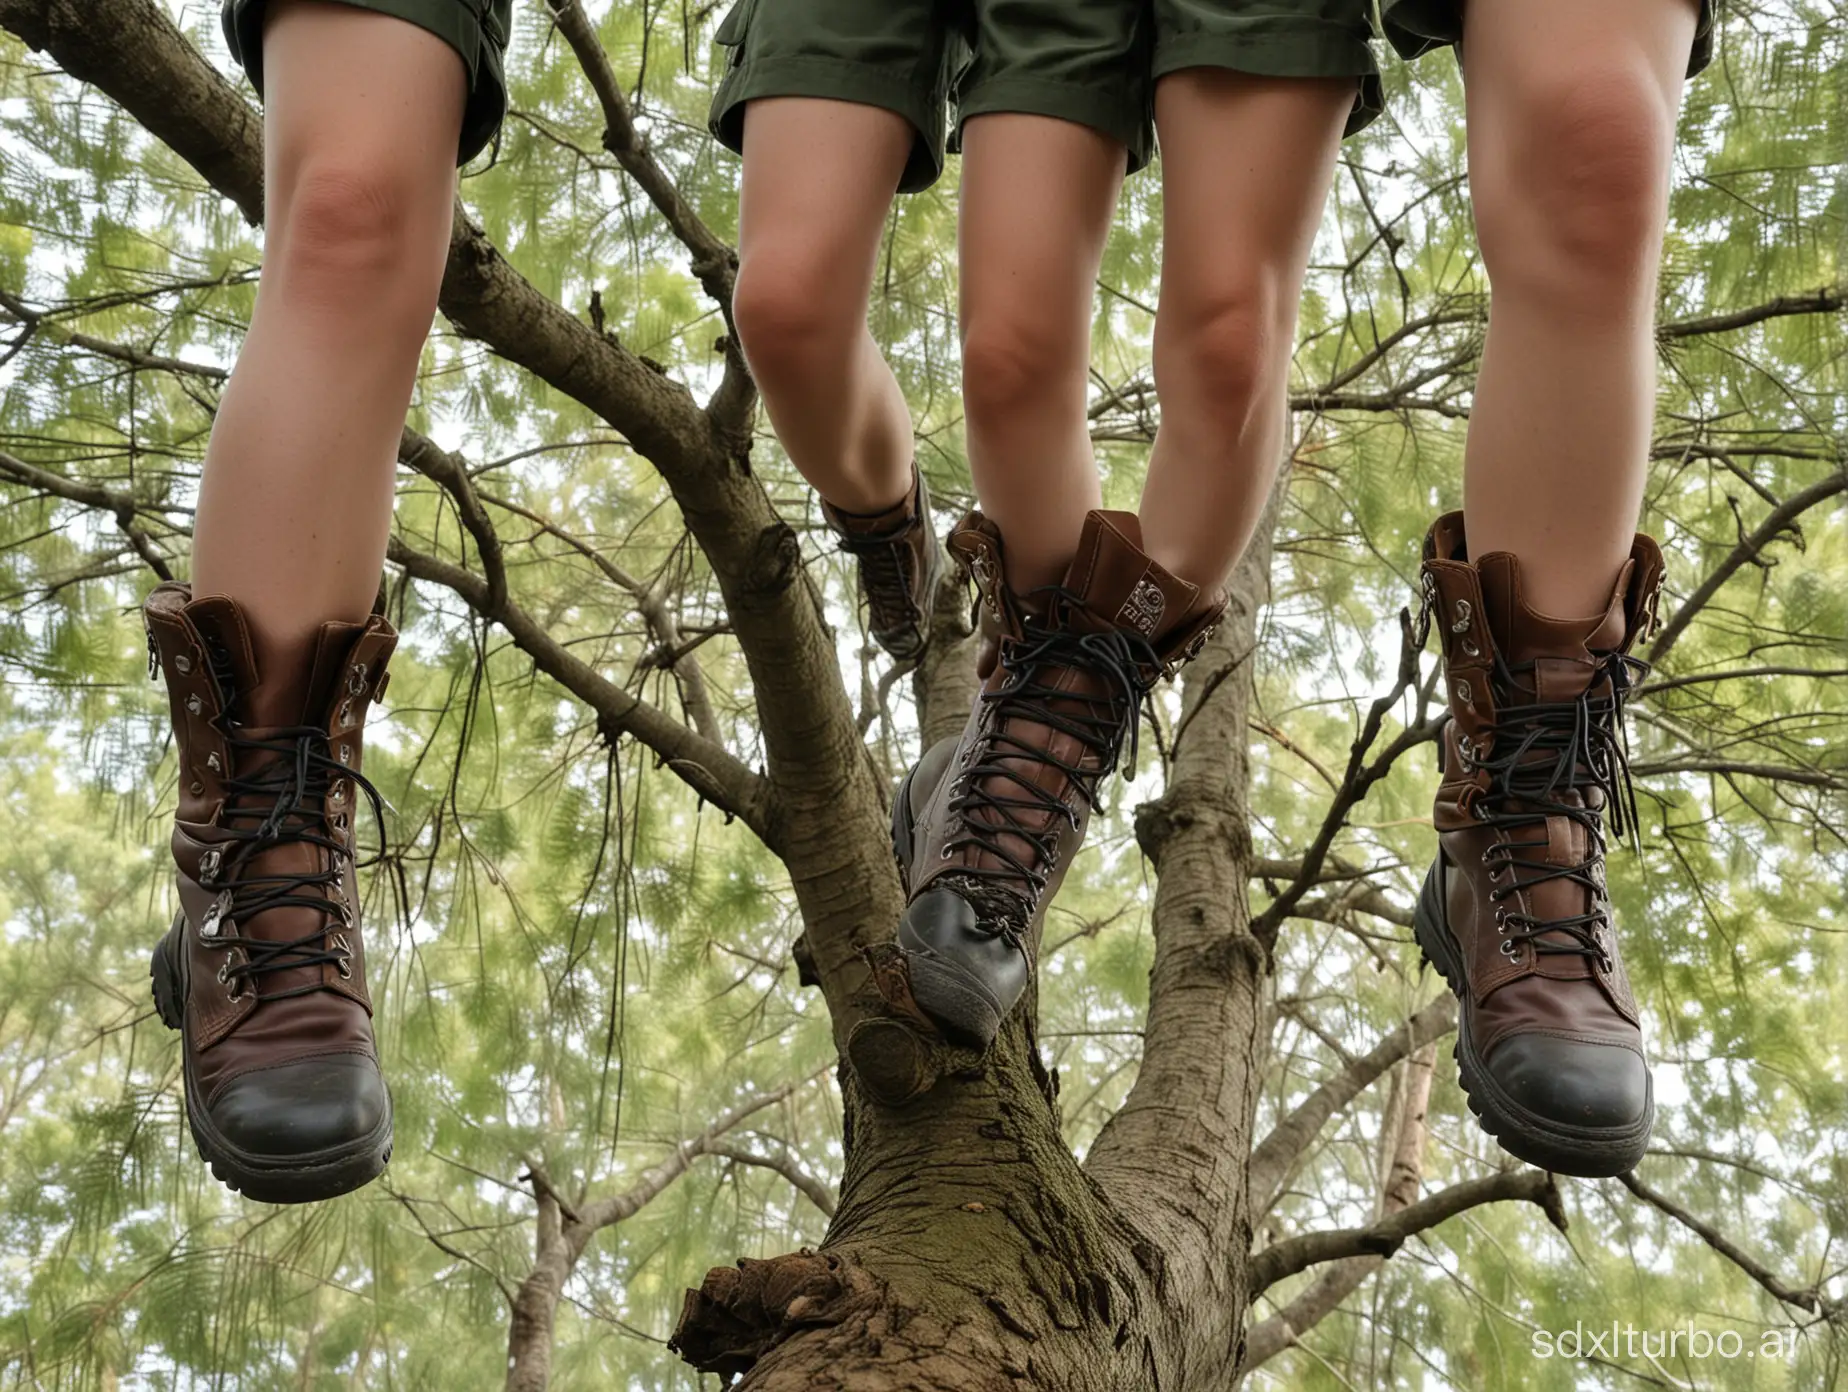 pathfinder boys sit on a tree branch with their legs dangling towards the camera, close-up low angle picture from below